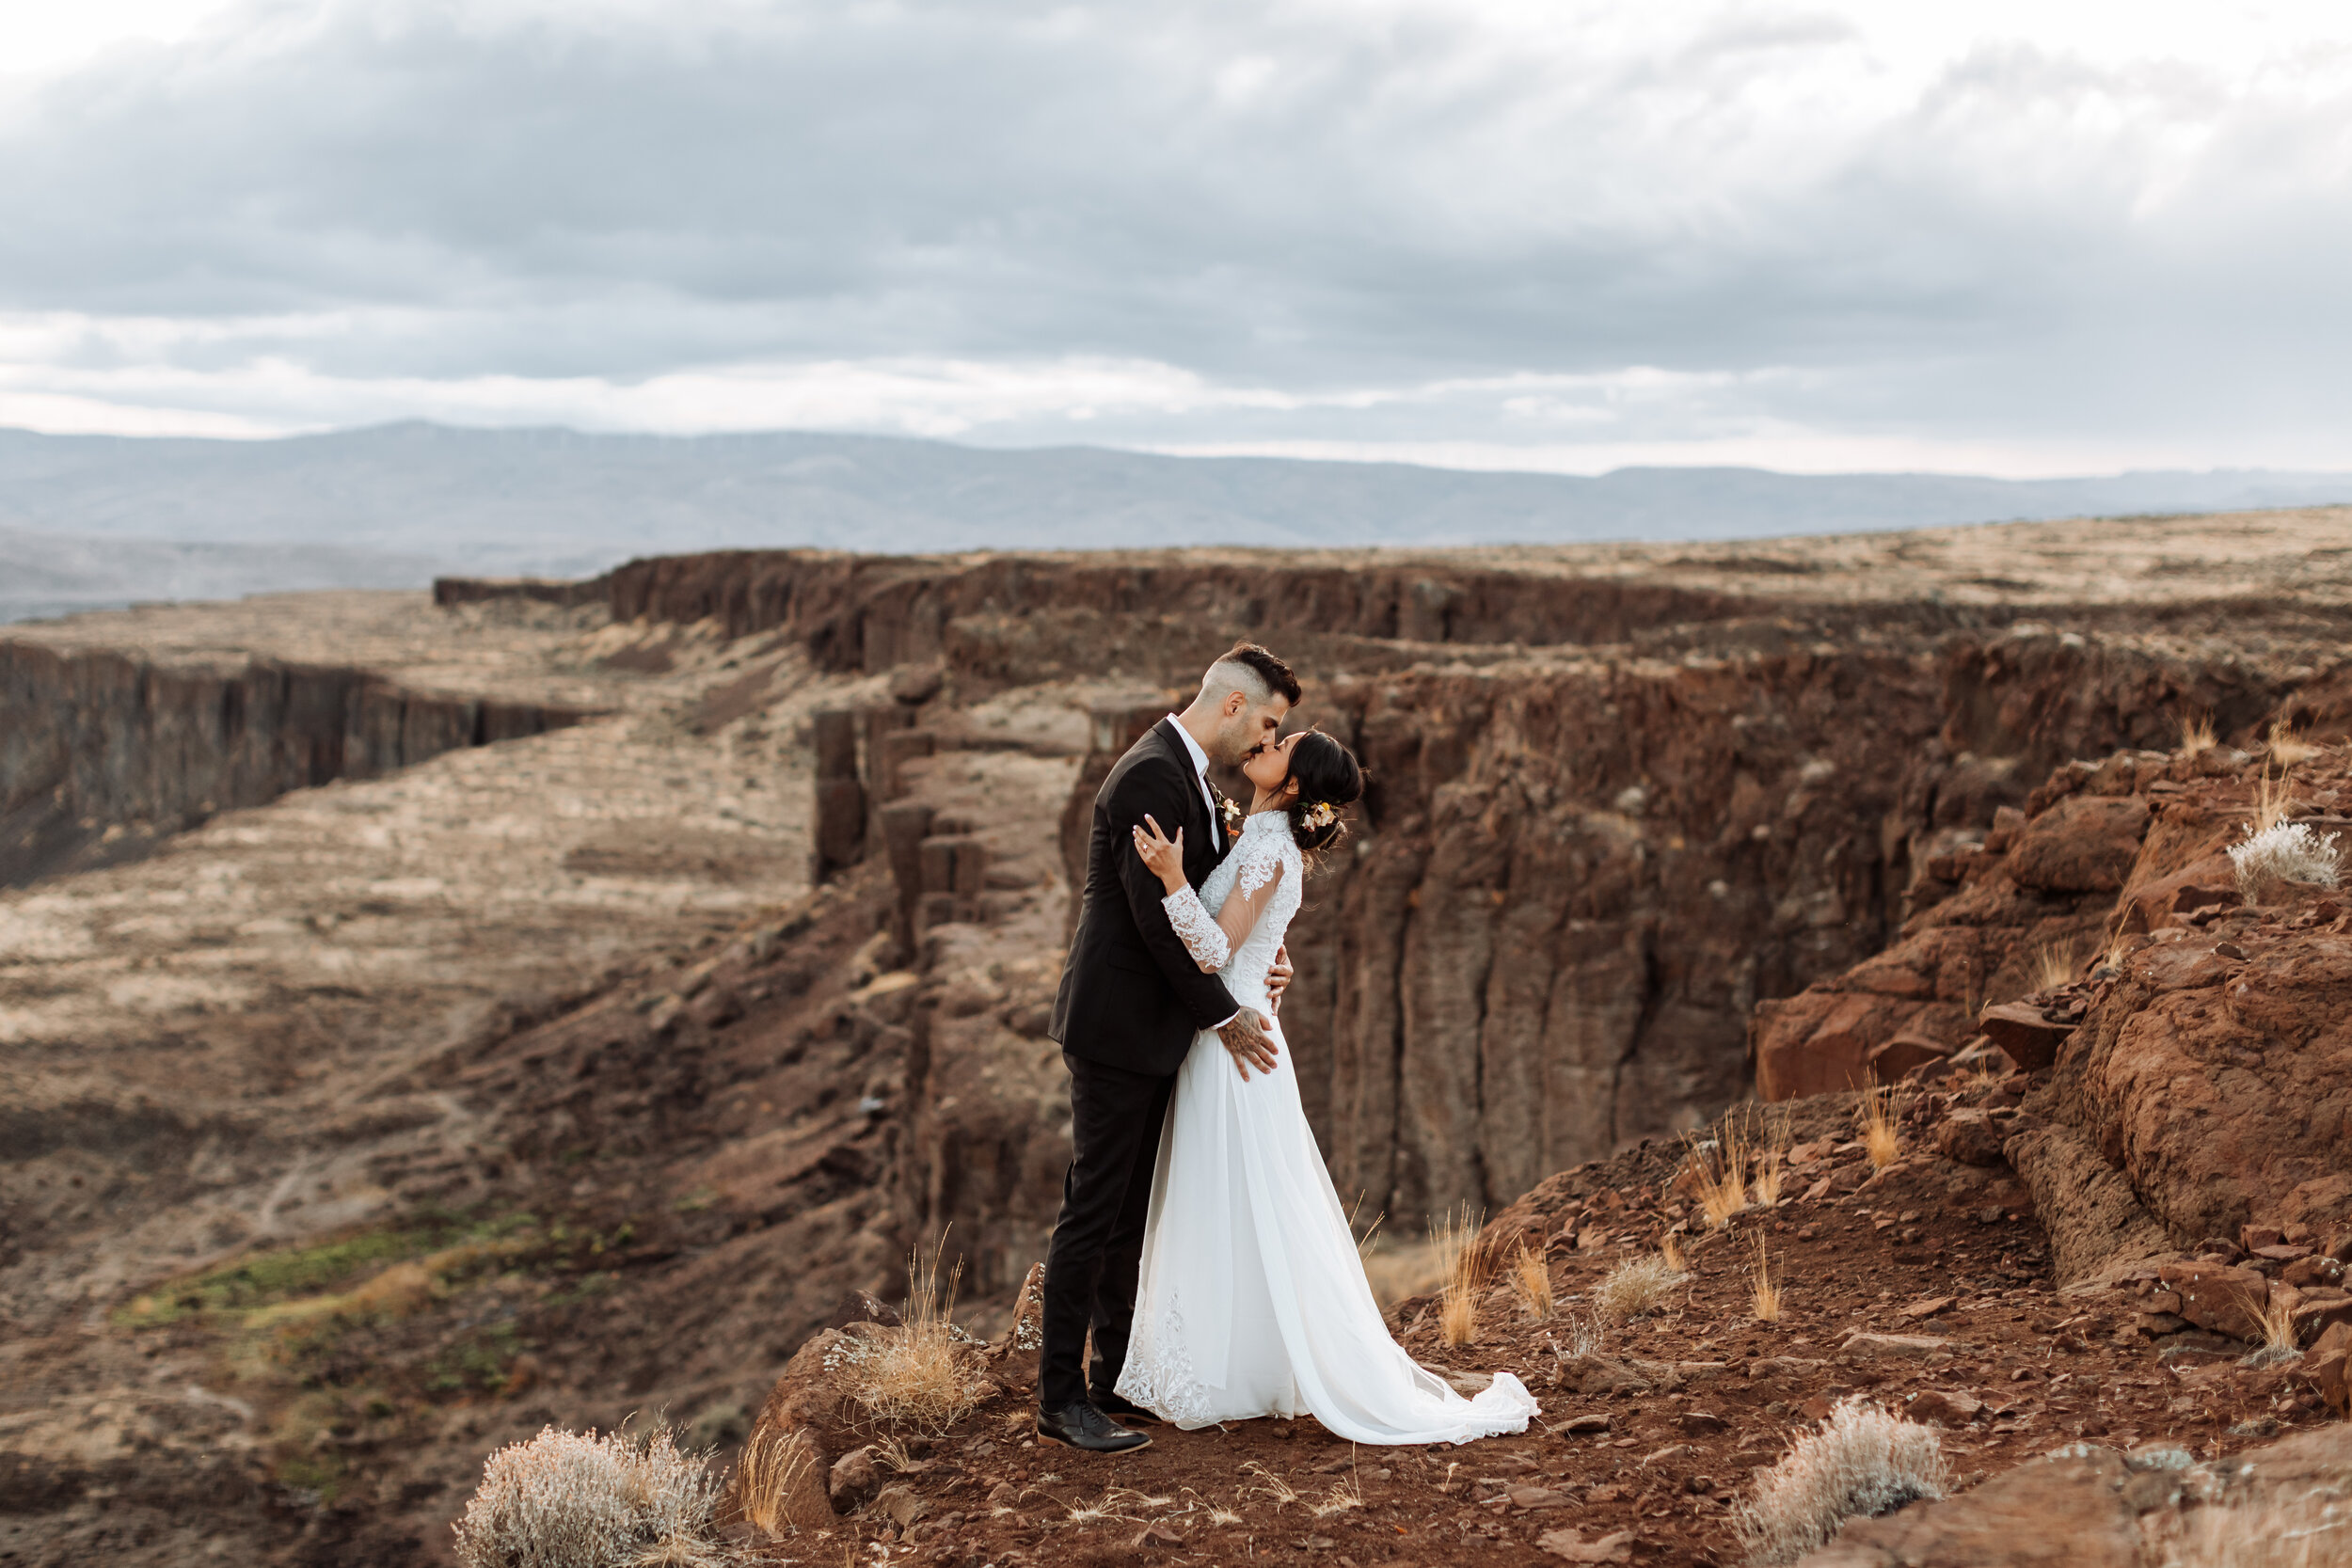 Underrated Elopement Destinations in WA - Eloping has become the popular way to get married these days— less stress, less money and epic locations for photos! There are so many places in WA that would be perfect for a destination elopement but as eloping becomes more popular, so do those areas. We wanted to give you a list of unique places to elope in WA state that are just as gorgeous as the most popular ones!